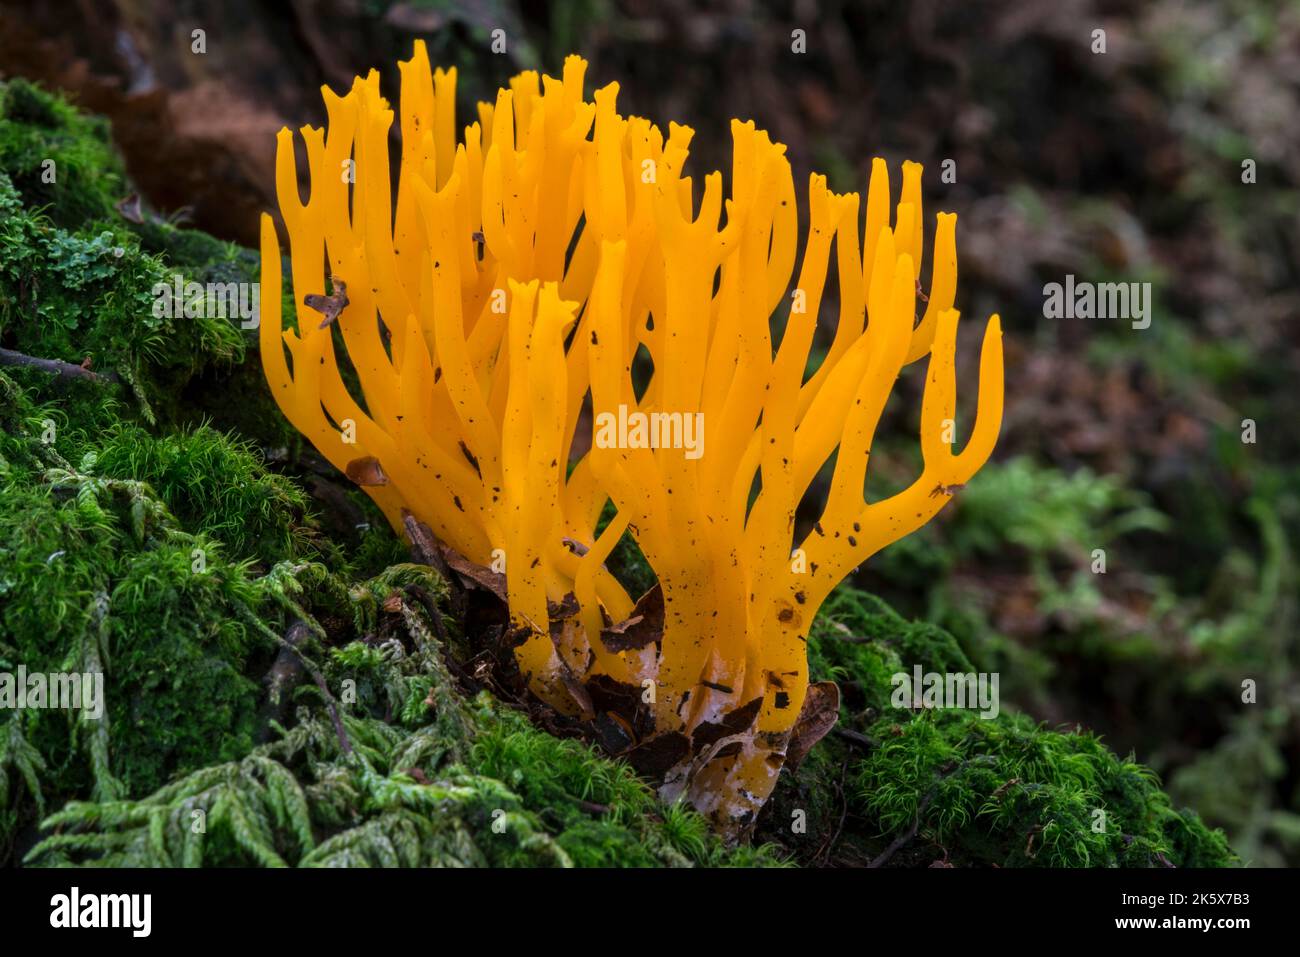 Yellow stagshorn (Calocera viscosa), jelly fungus showing branching basidiocarps among moss on forest floor in autumn woodland Stock Photo